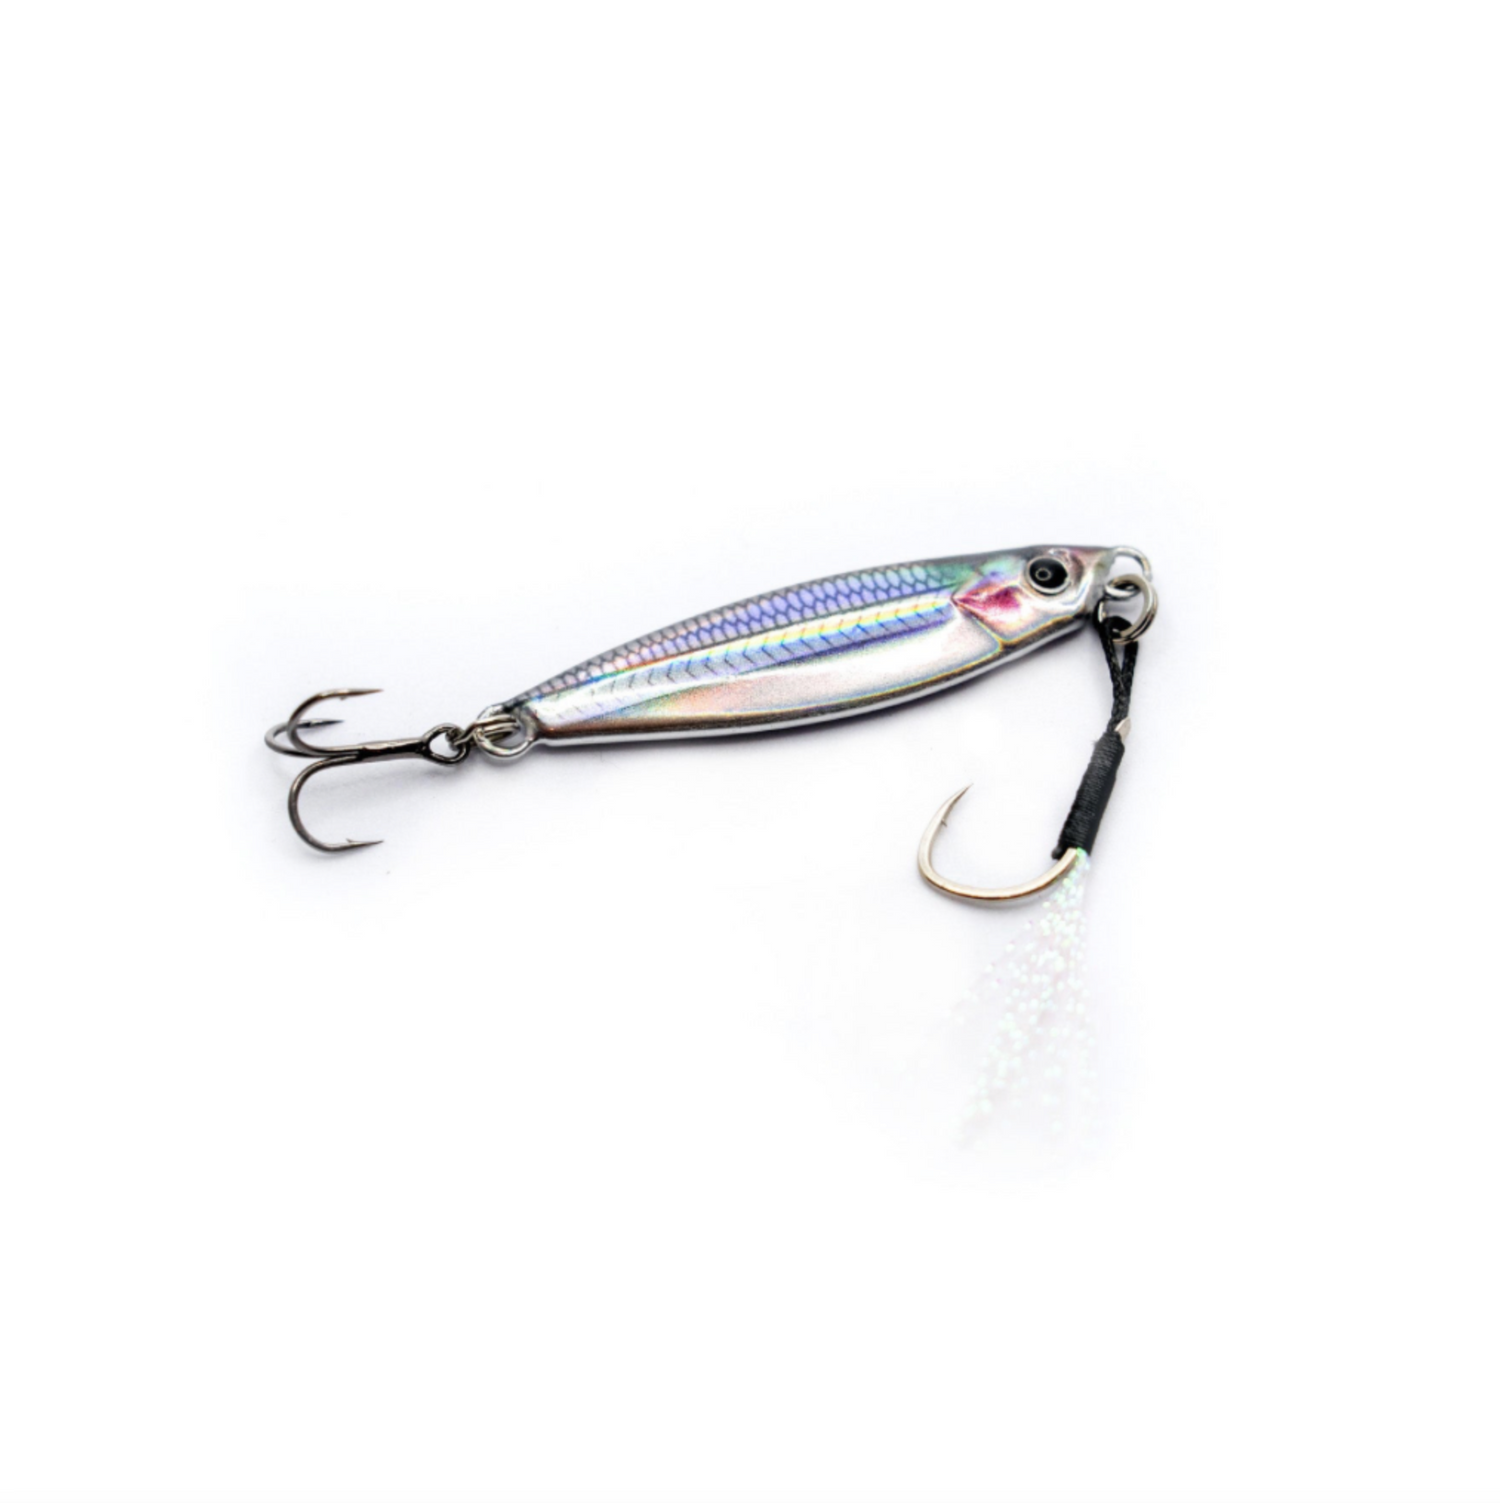 Bouncing Jigs: Micro Jig Lures from the Metal Addict Collection